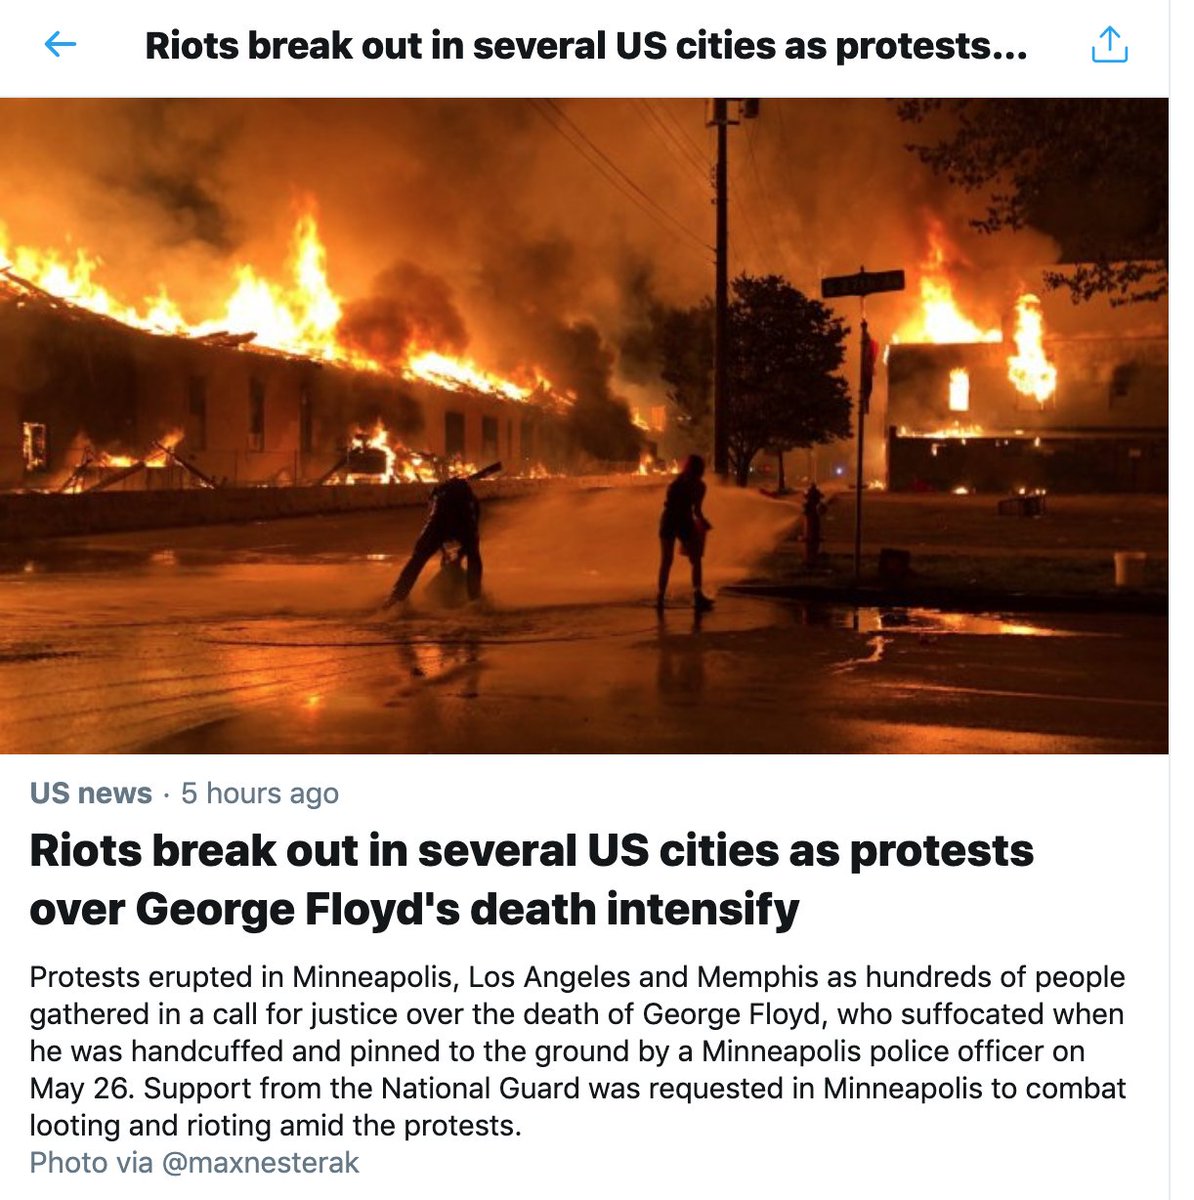 Okay, journalists, let's have a talk, shall we? Because I am damn tired of seeing lazy reporting and lazy framing like this.First off: Let's remember what these protests are about. Racial injustice. Centuries of racial injustice.